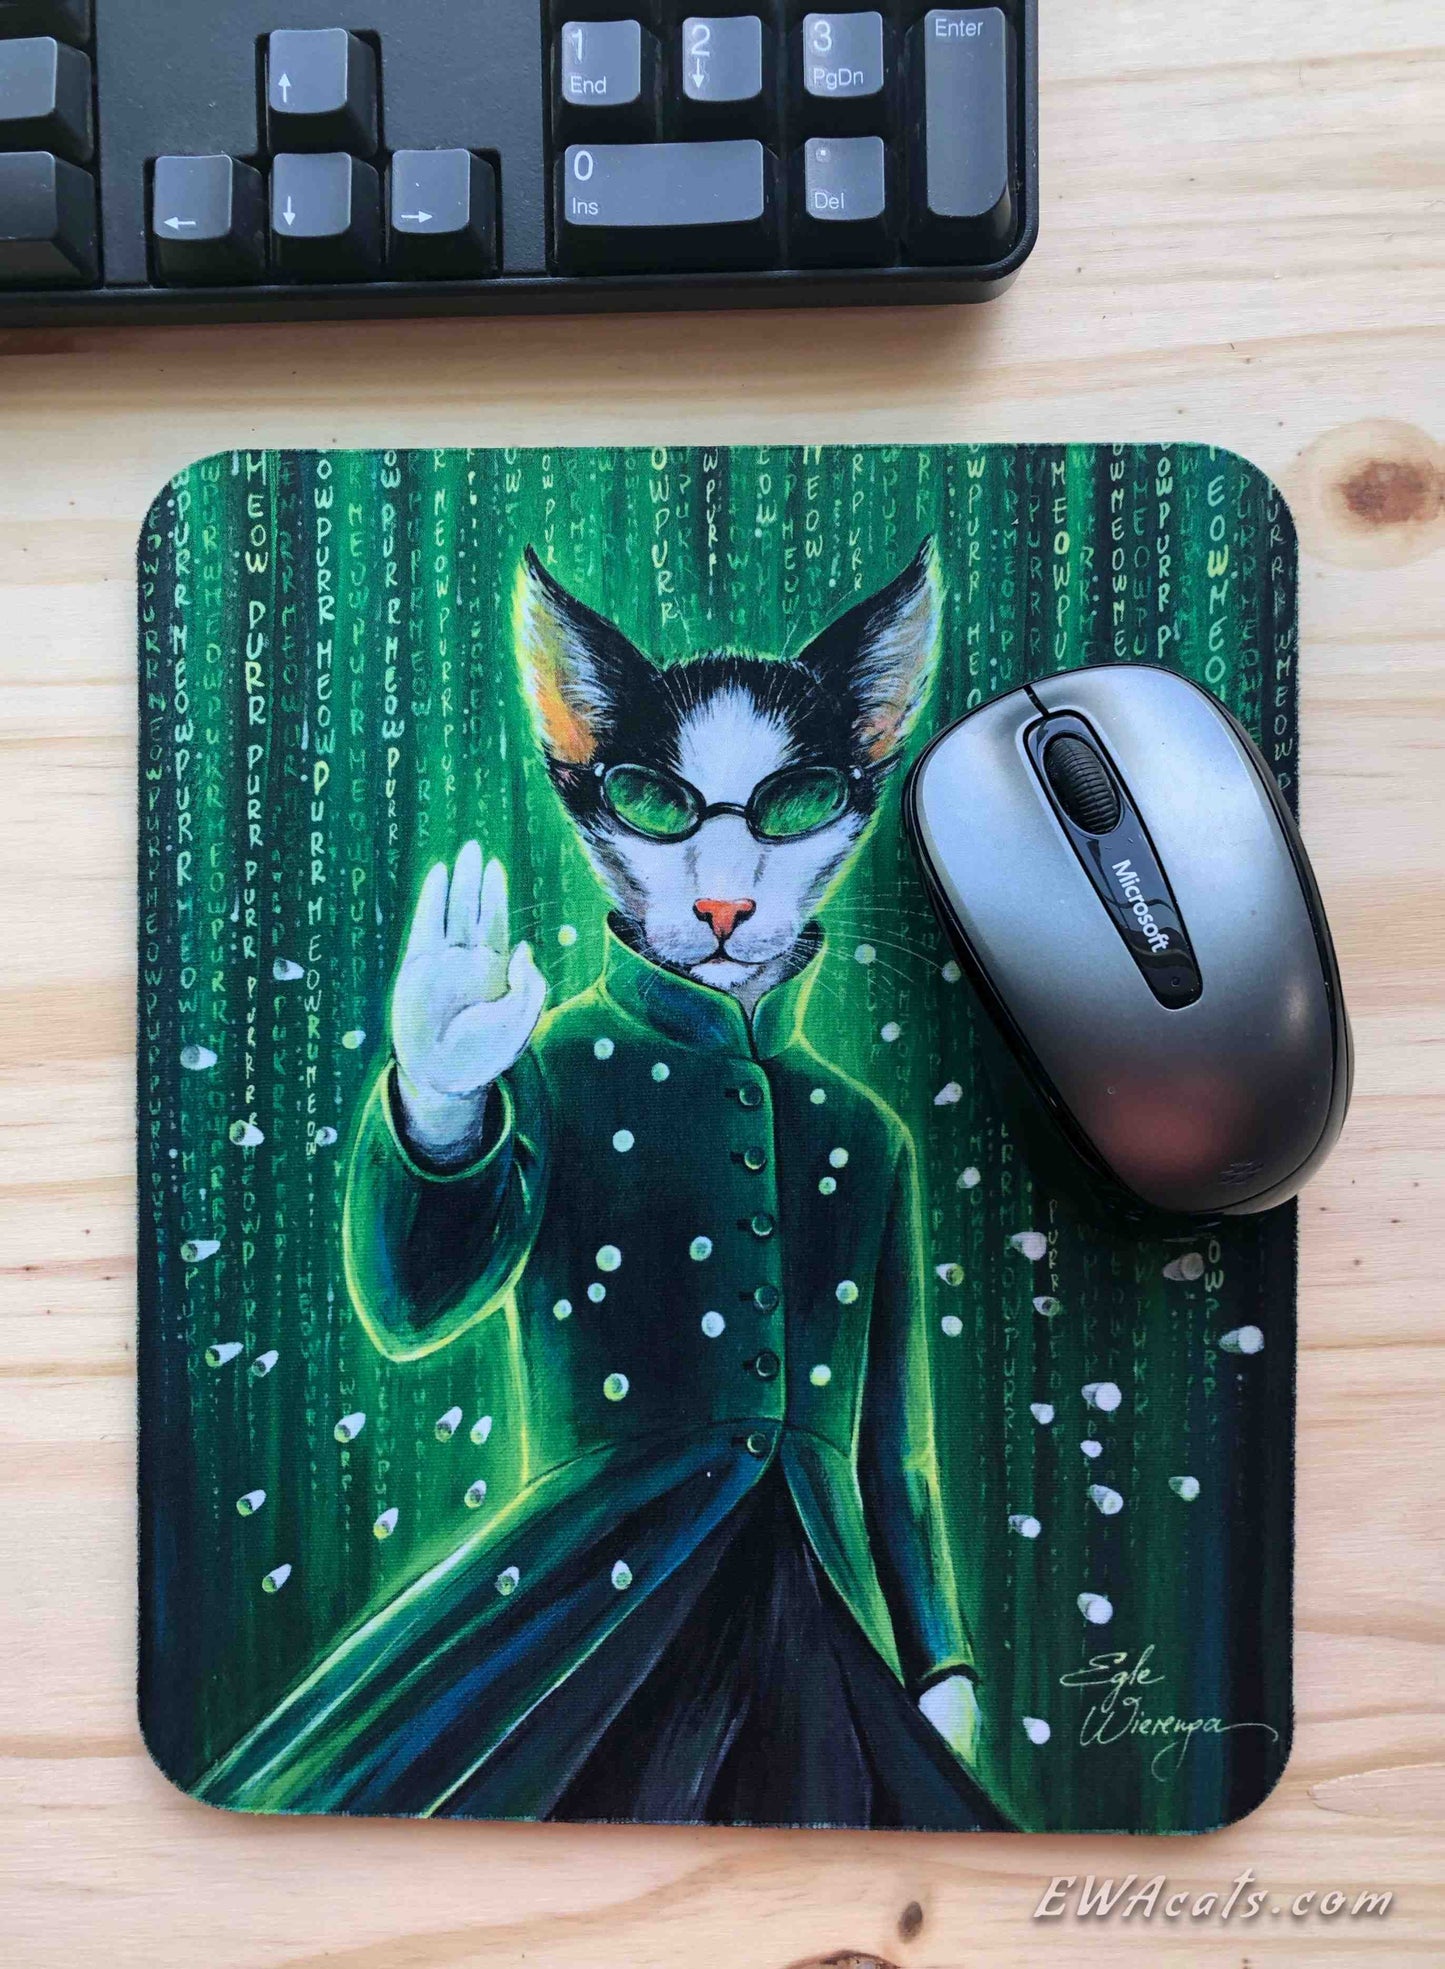 Mouse Pad "Meo"